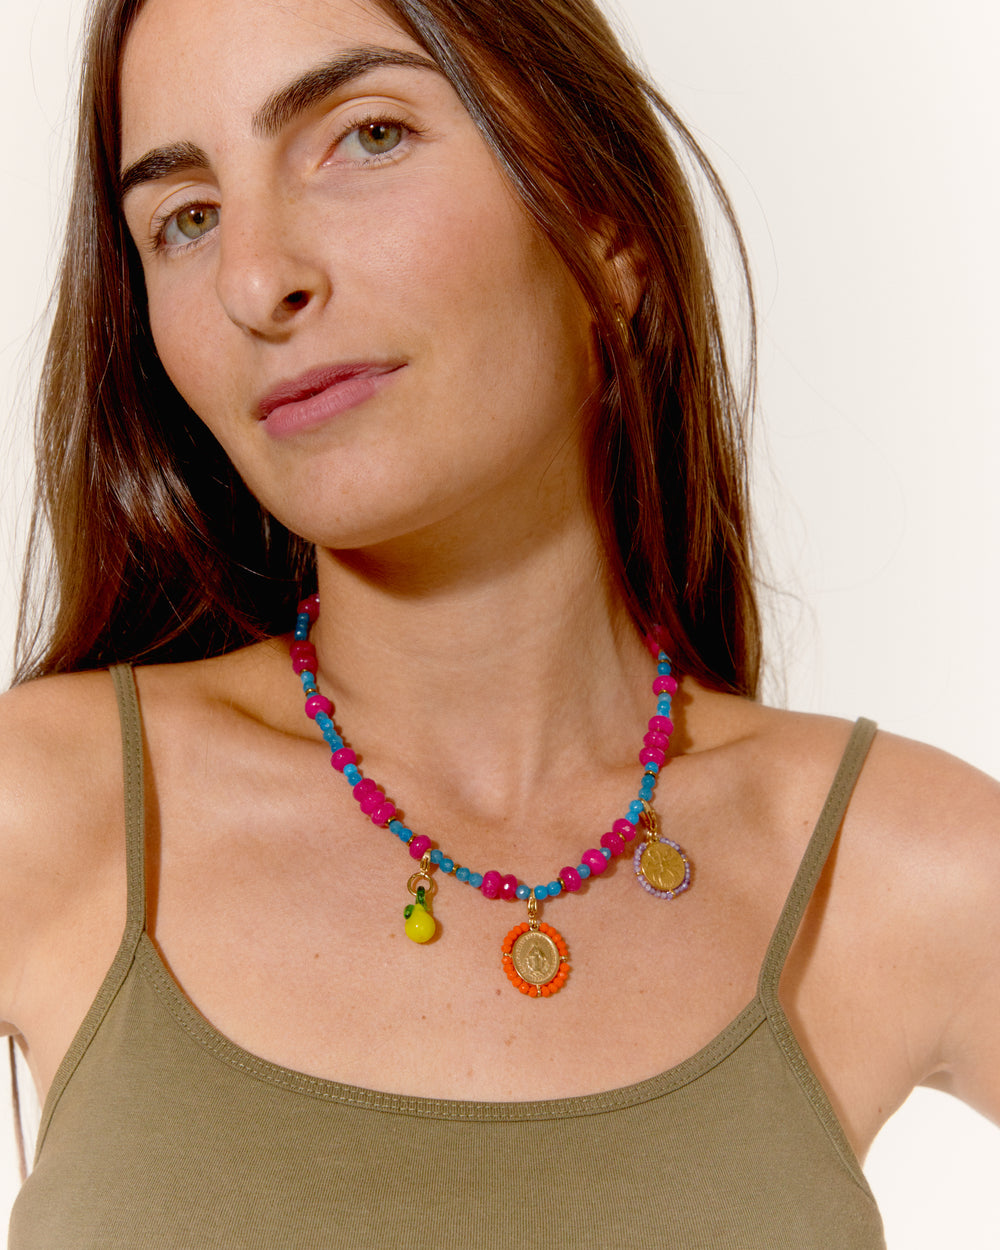 Colorful choker and delightful charms - Palas